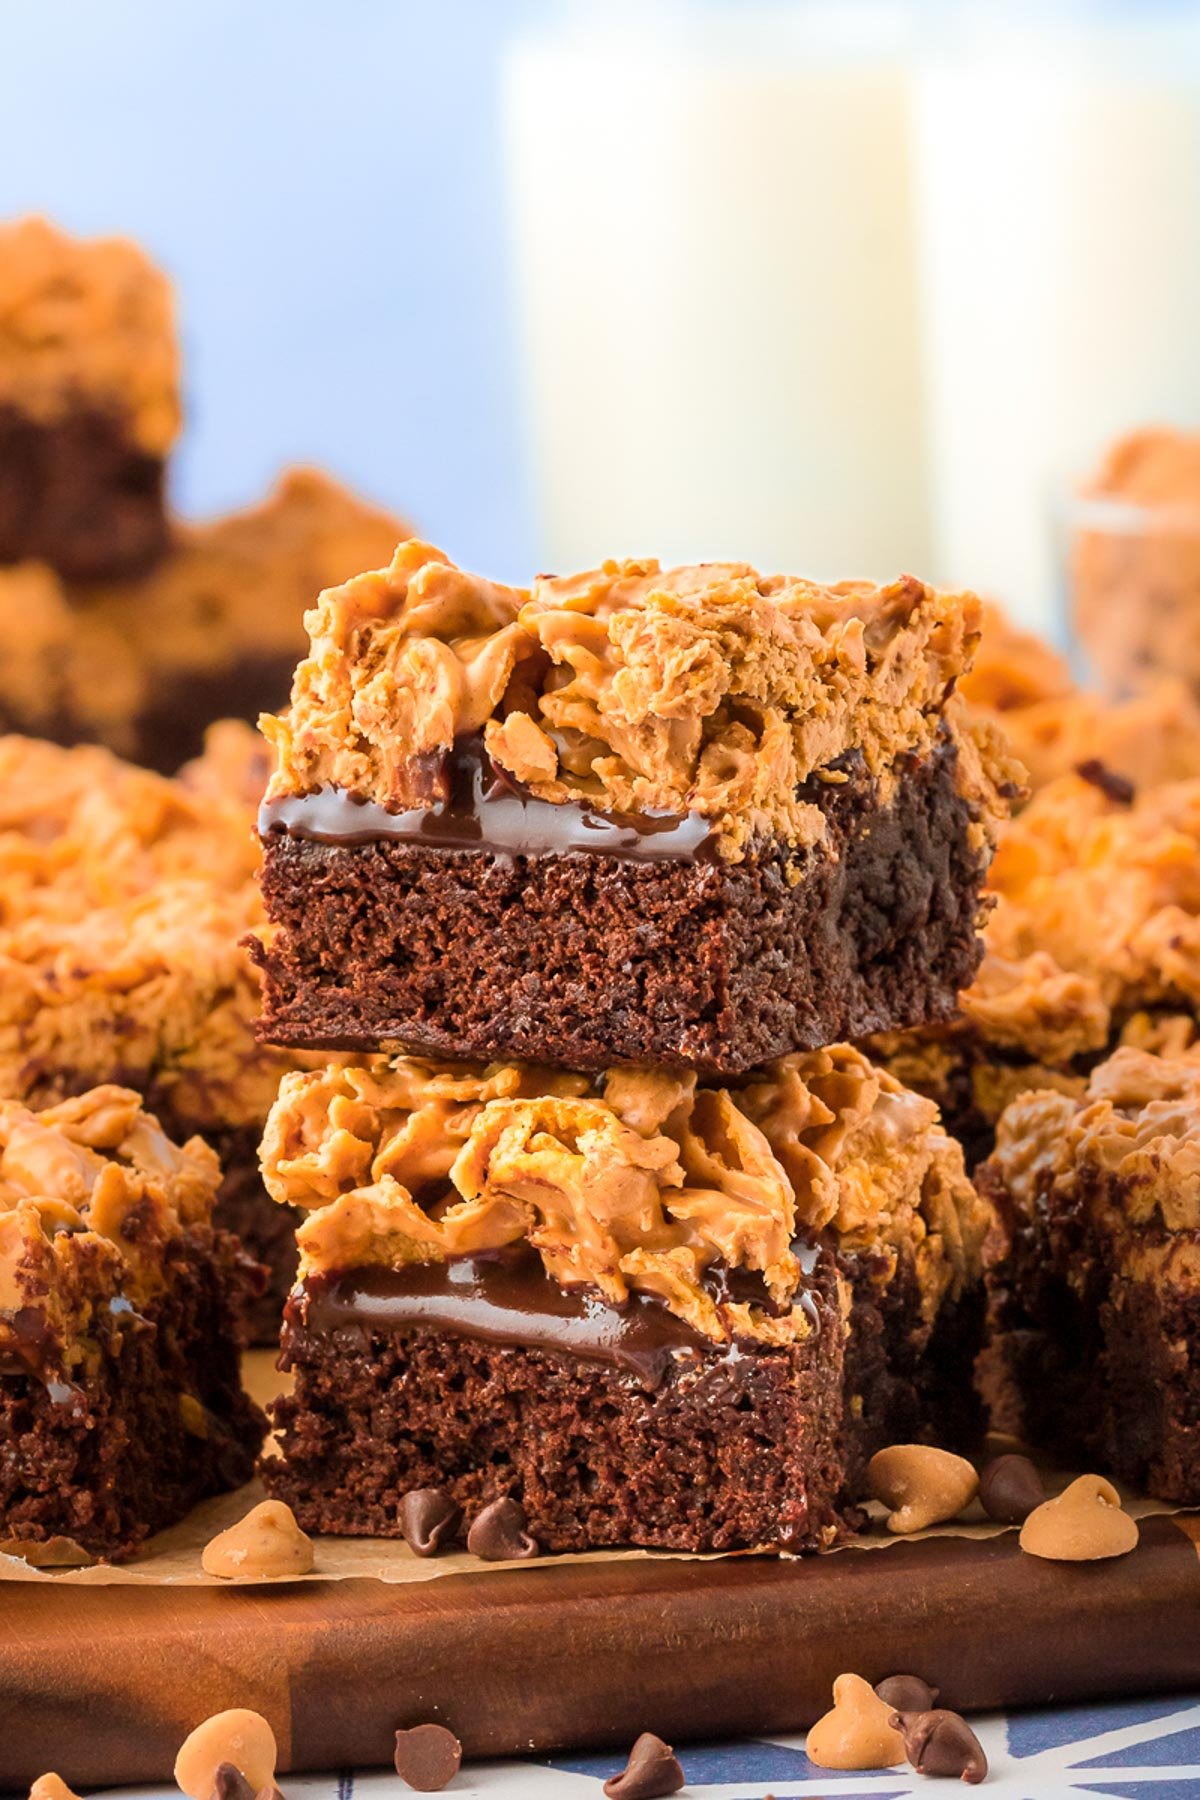 A stack of two peanut butter crunch brownies on a wooden plate with more in the background.